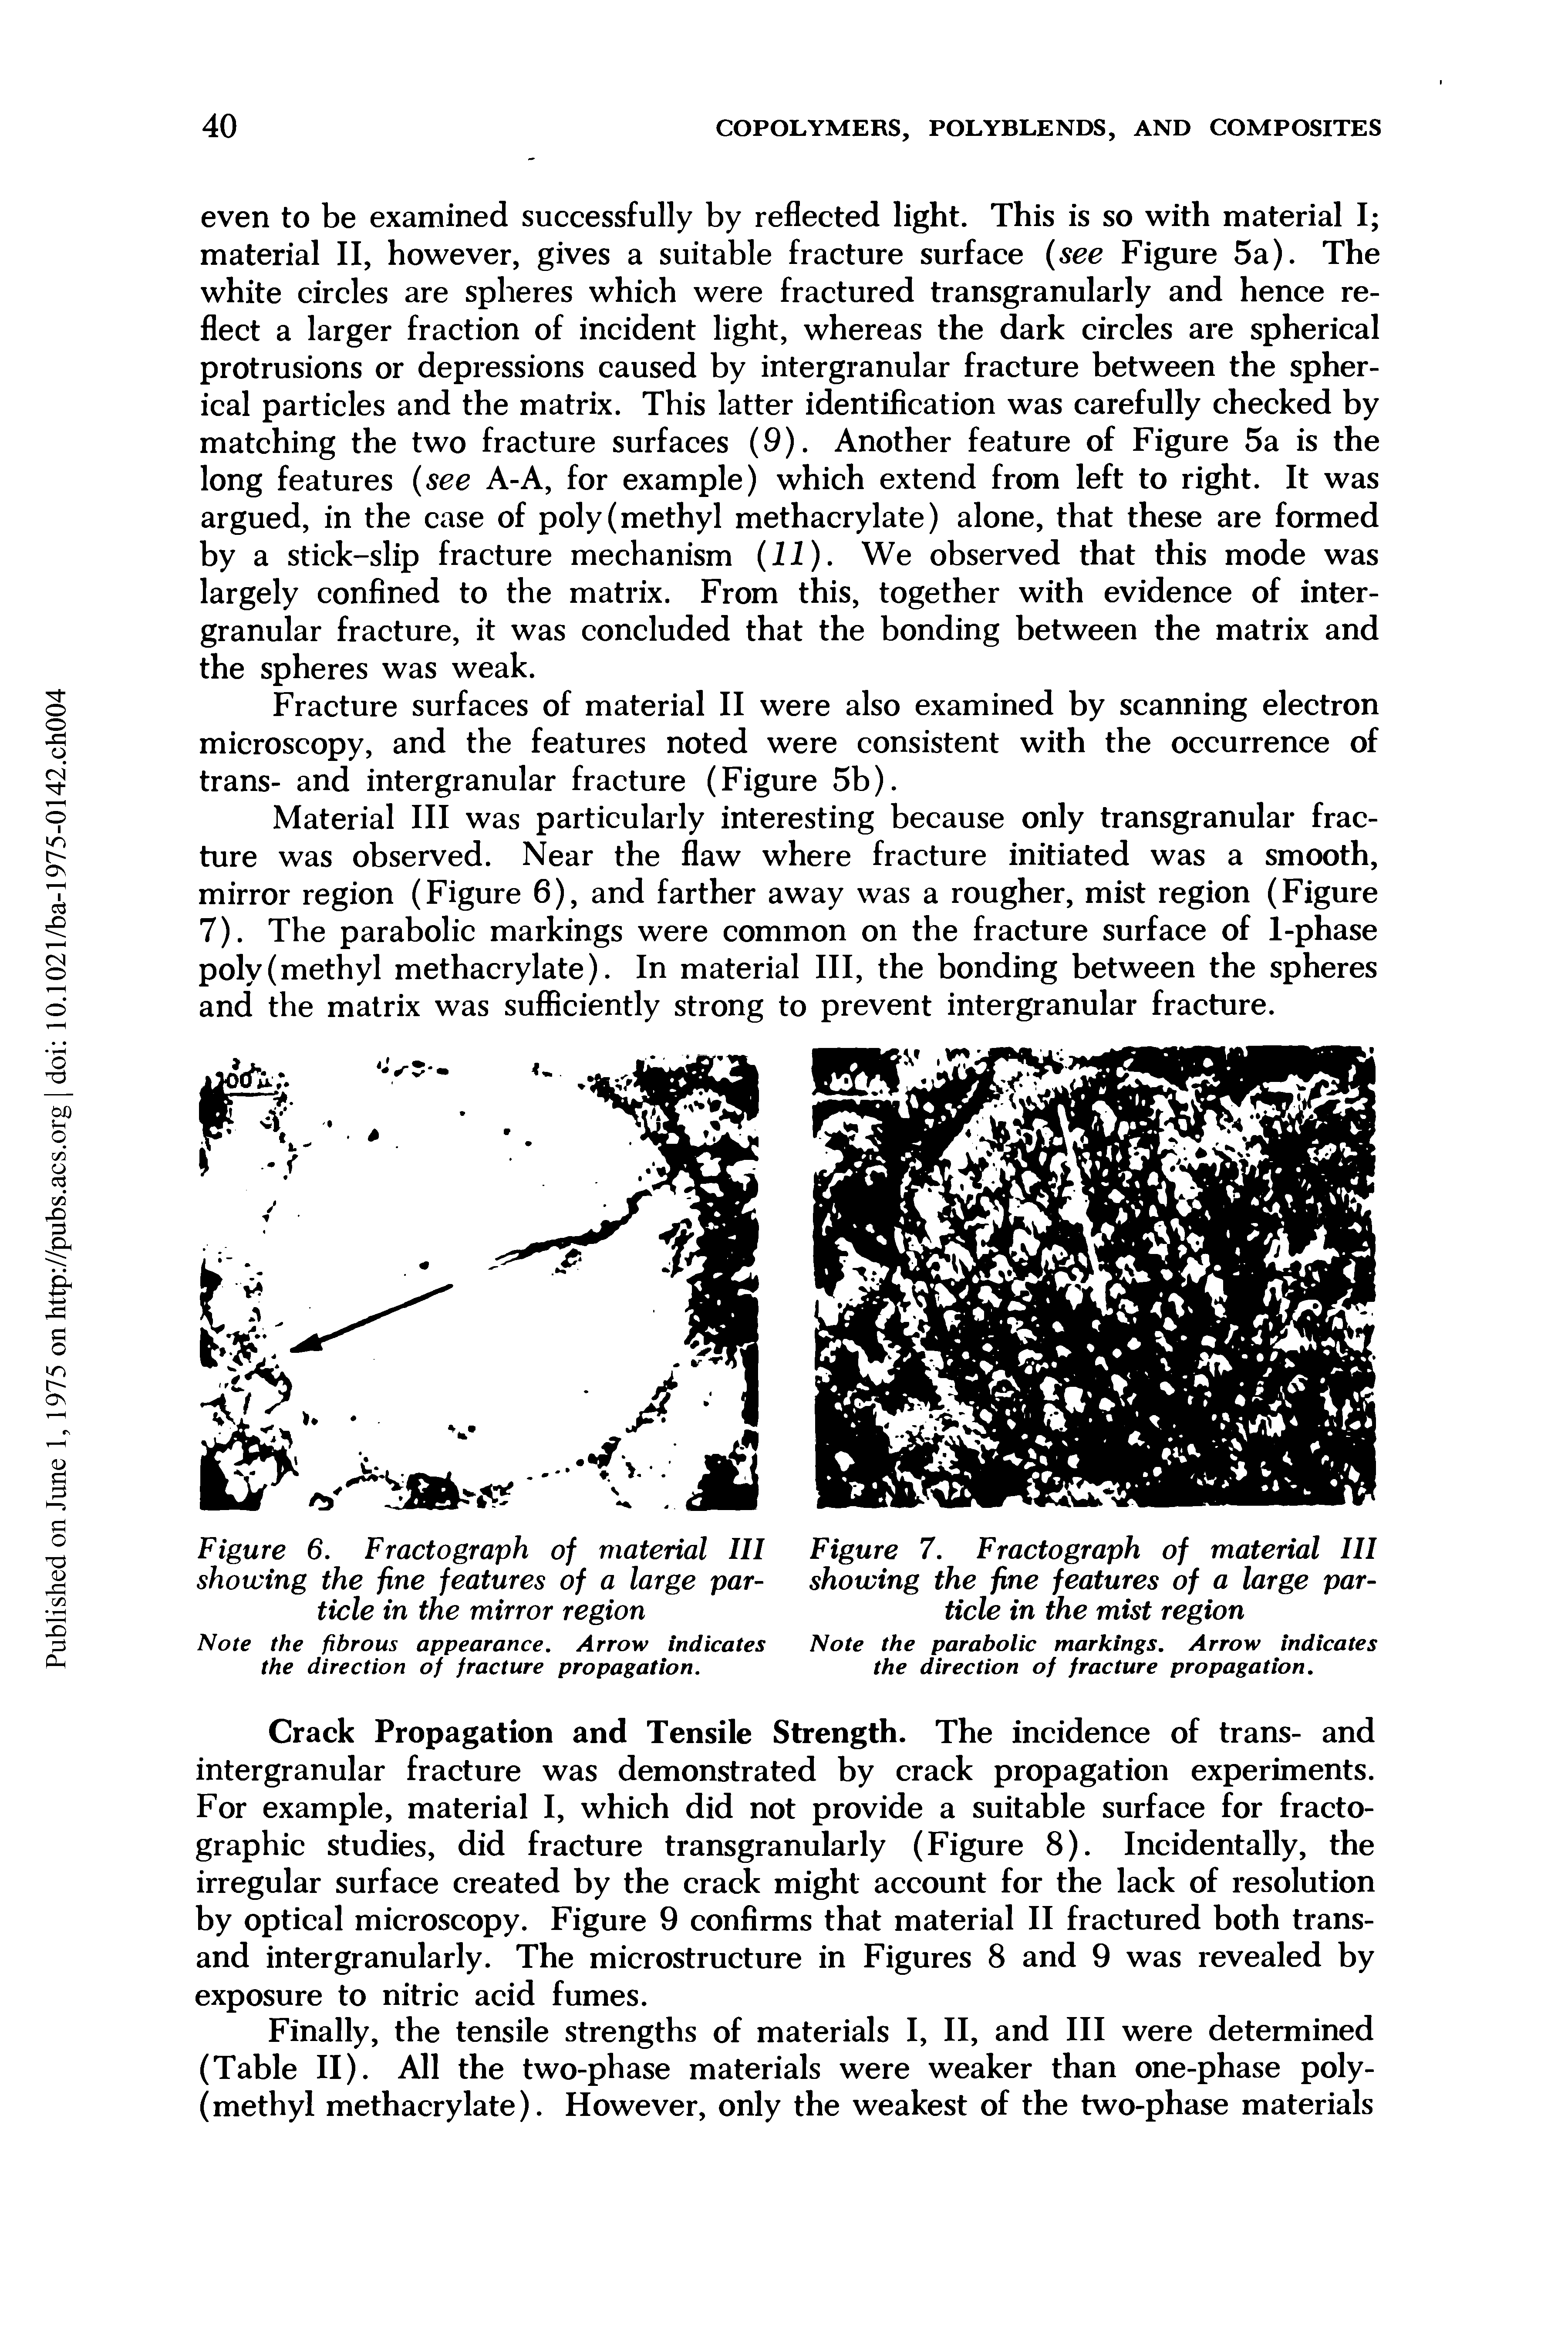 Figure 6. Fractograph of material III showing the fine features of a large particle in the mirror region...